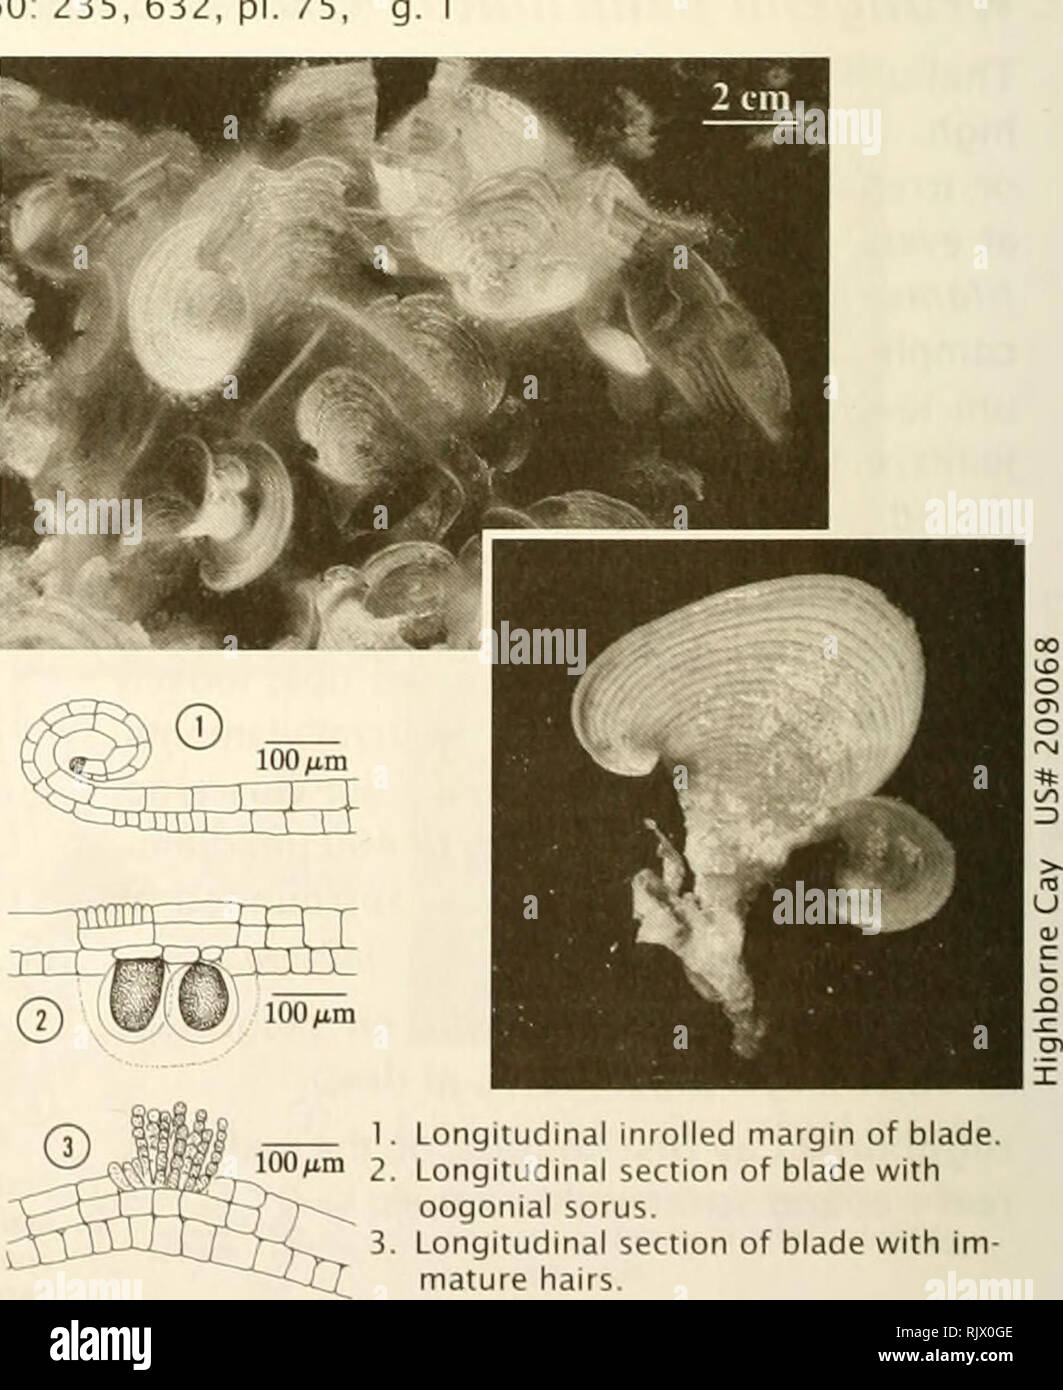 . Atoll research bulletin. Coral reefs and islands; Marine biology; Marine sciences. 100/im Phylum Heterokontophyta Class Phaeophyceae Order Dictyotales Family Dlctyotaceae Habit of blade. Surface view of antheridial sorus (s) surrounded by paraphyses (a). Transverse section of blade margin showing antheridial sori (s) and mar- ginal rhizoids (r). Pad'mCI haitiensiS Thivy in W.R. Taylor 1 960: 235, 632, pi. 75, Thallus: in leaf- like clusters, ru ed, to 6 cm high, upper surface chalky white alternating with light yellow- brown bands, lower surface less calci ed with darker brown bands. Blades  Stock Photo